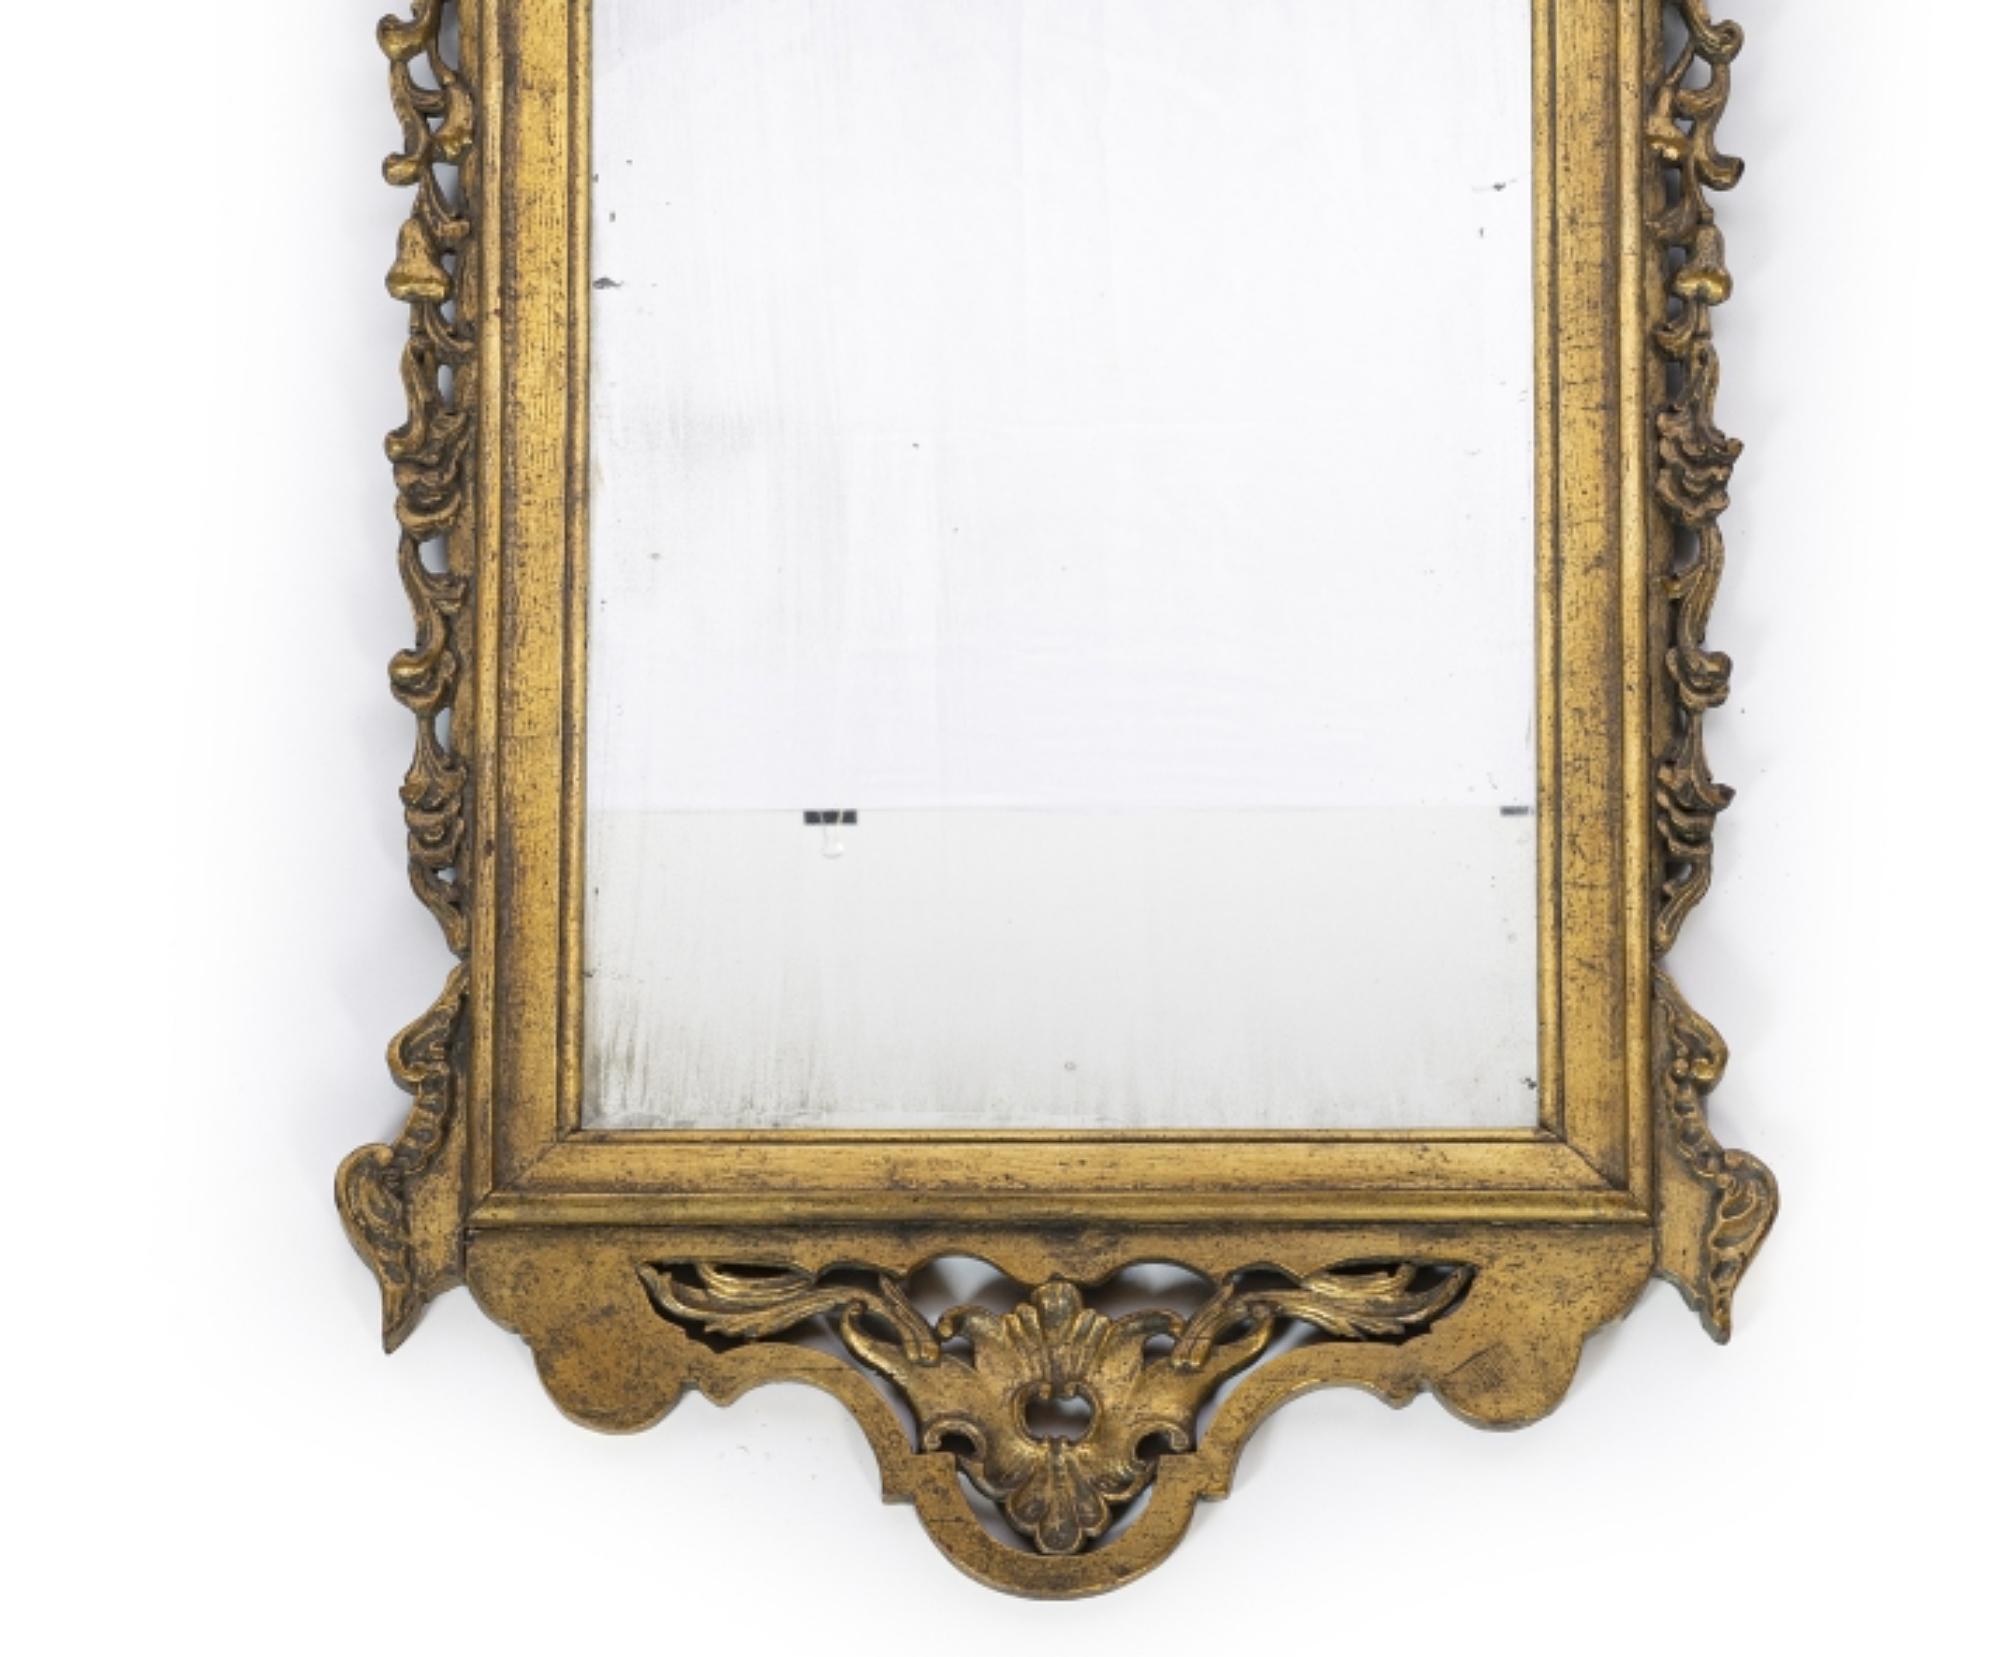 PORTUGUESE MIRROR 19th century

in carved, pierced and gilded wood.
Small defects.
Usage signs.
DIM.: 150 x 65 cm.
Good conditions.